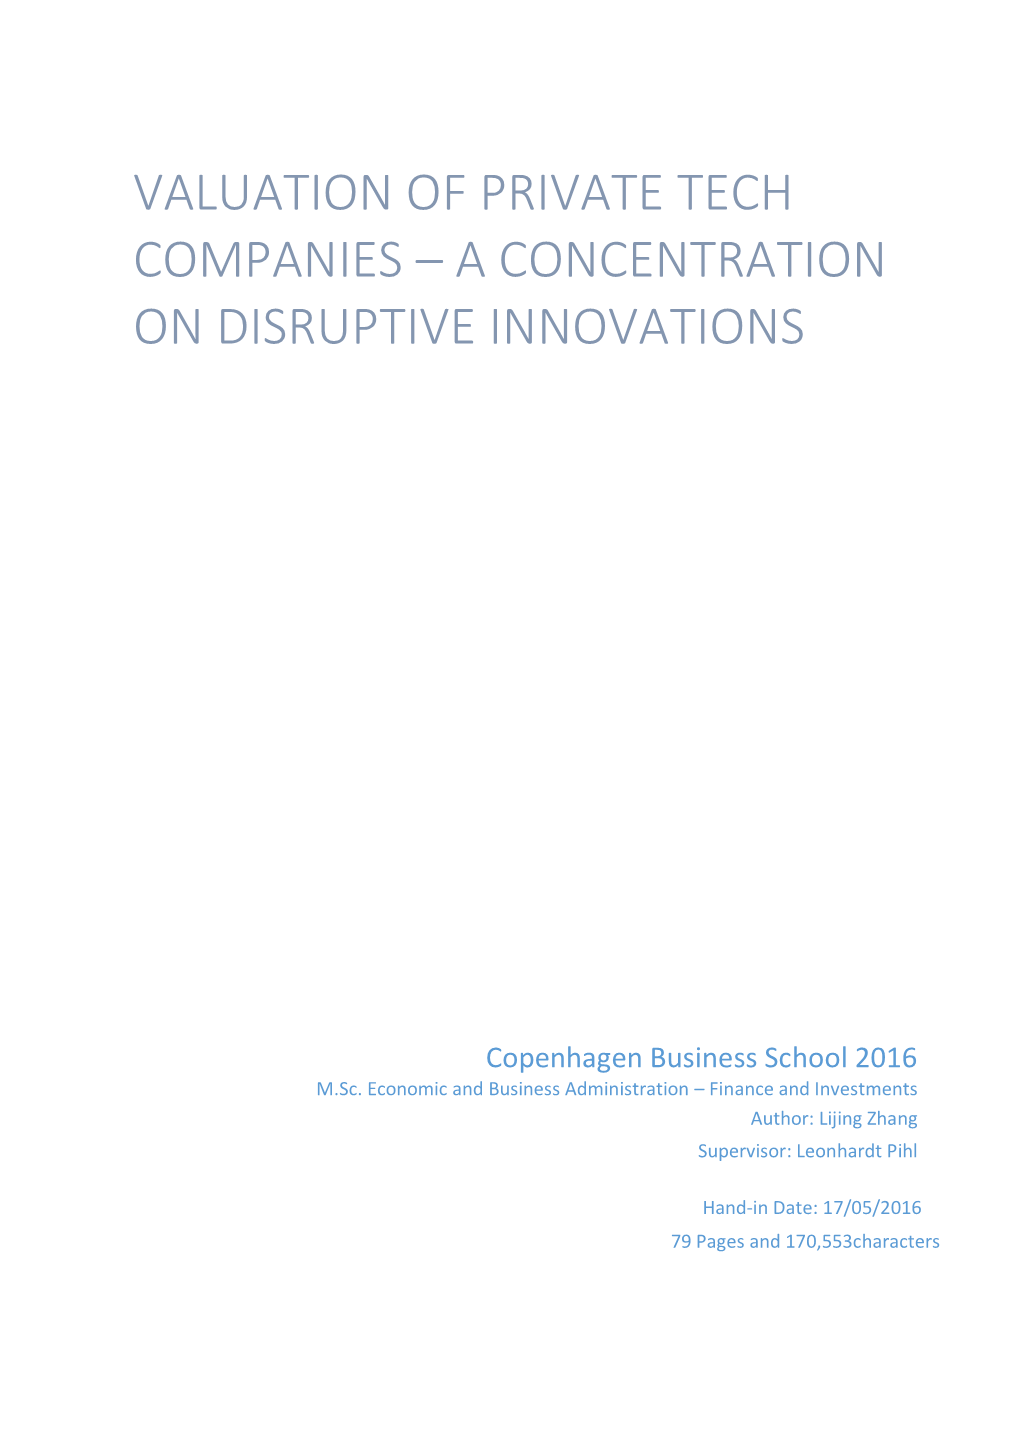 Valuation of Private Tech Companies – a Concentration on Disruptive Innovations